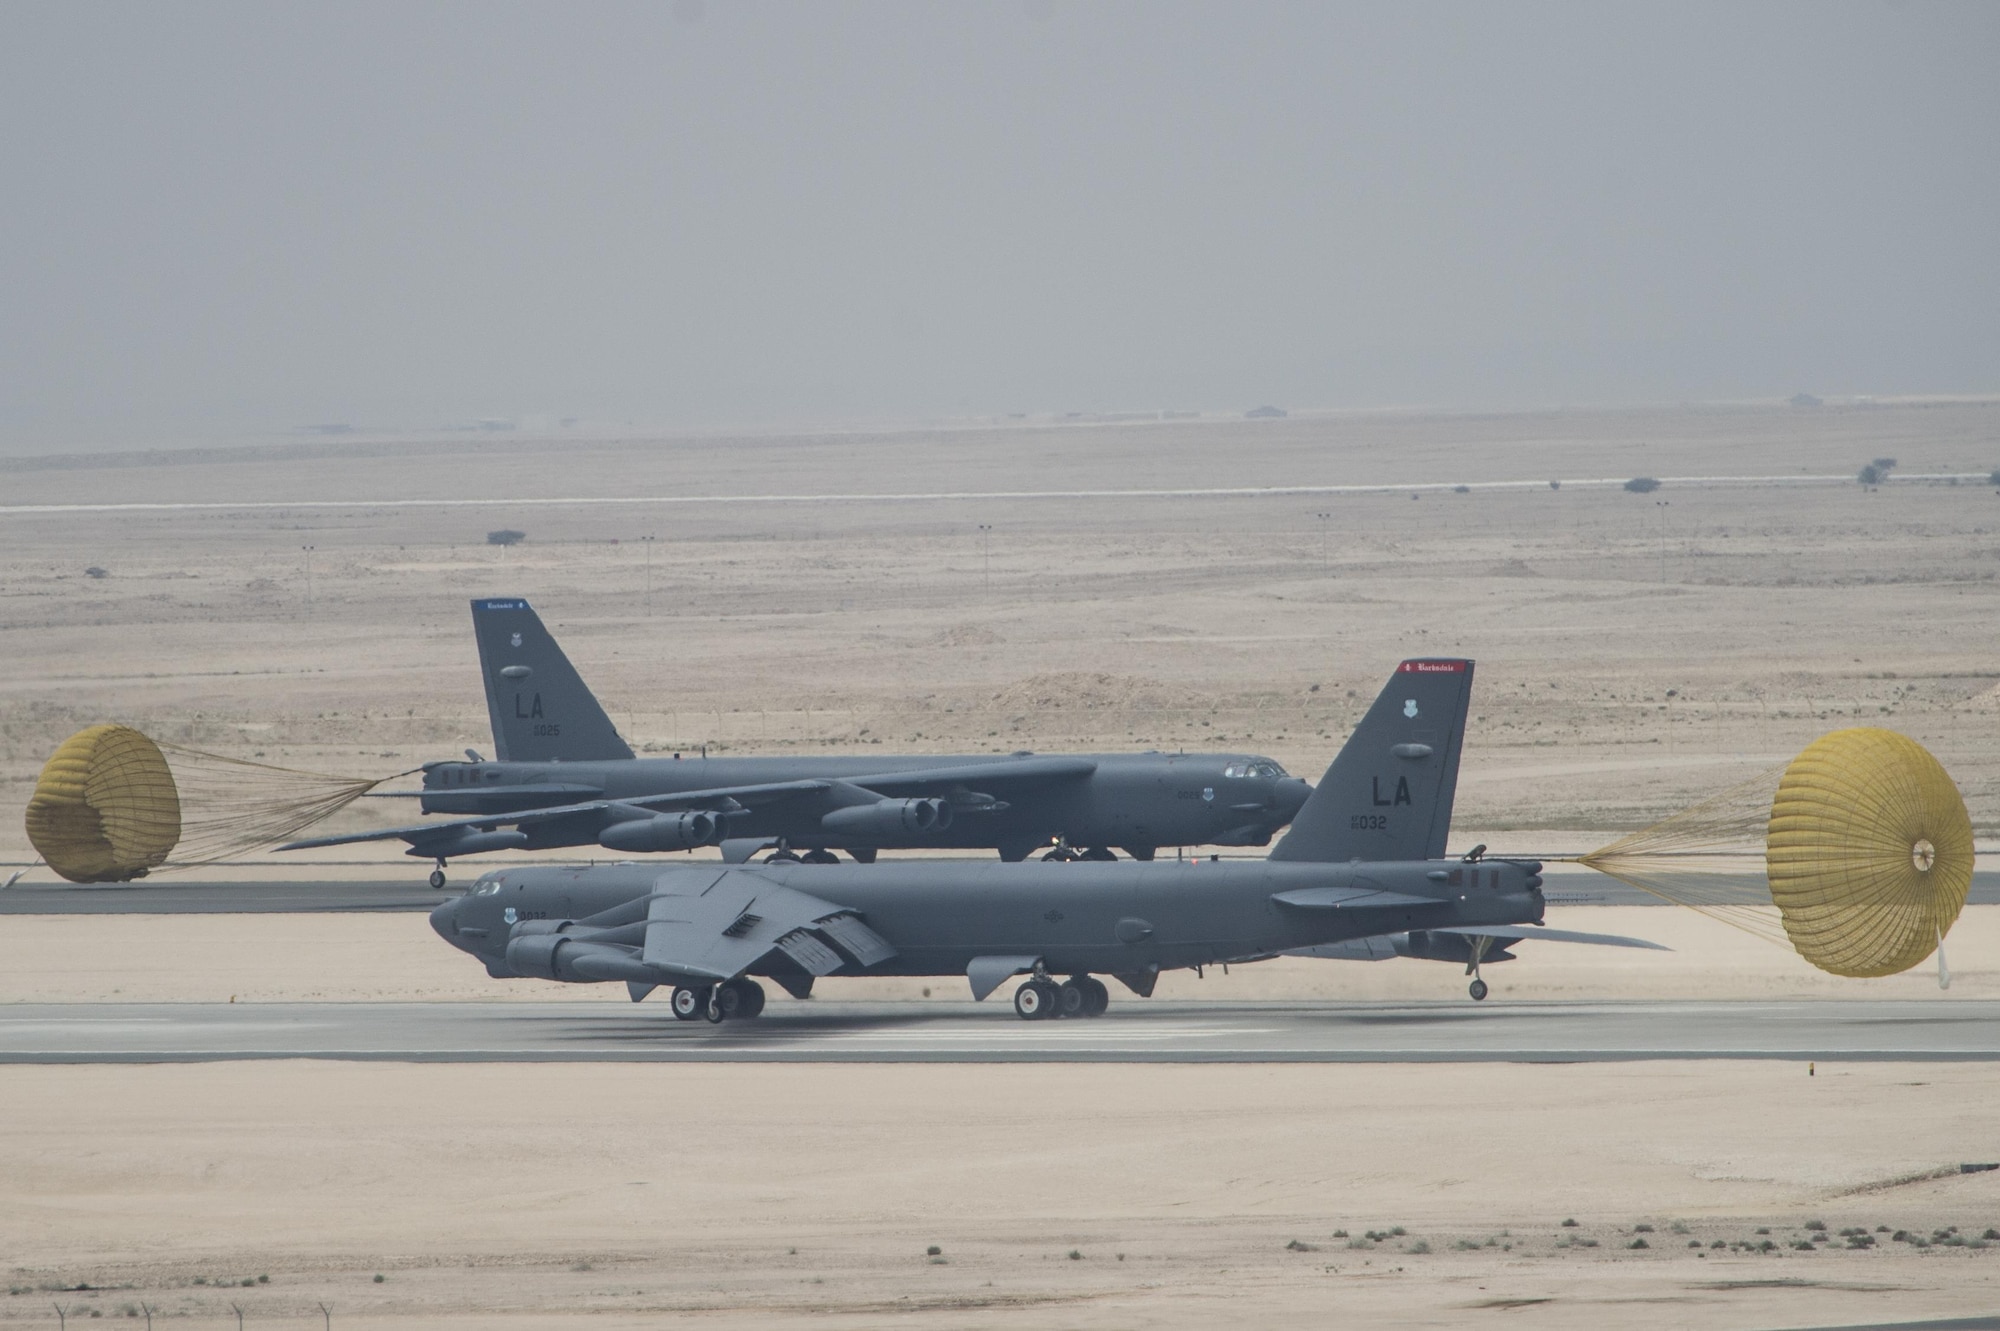 U.S. Air Force B-52 Stratofortress aircraft from Barksdale Air Force Base, La., arrived at Al Udeid Air Base, Qatar, April 9, 2016, in support of Operation Inherent Resolve, the operation to eliminate the Islamic State of Iraq and the Levant and the threat they pose to Iraq, Syria and the wider international community, and as needed in the region. The B-52 offers diverse capabilities including the delivery of precision weapons. (U.S. Air Force photo/Staff Sgt. Corey Hook)